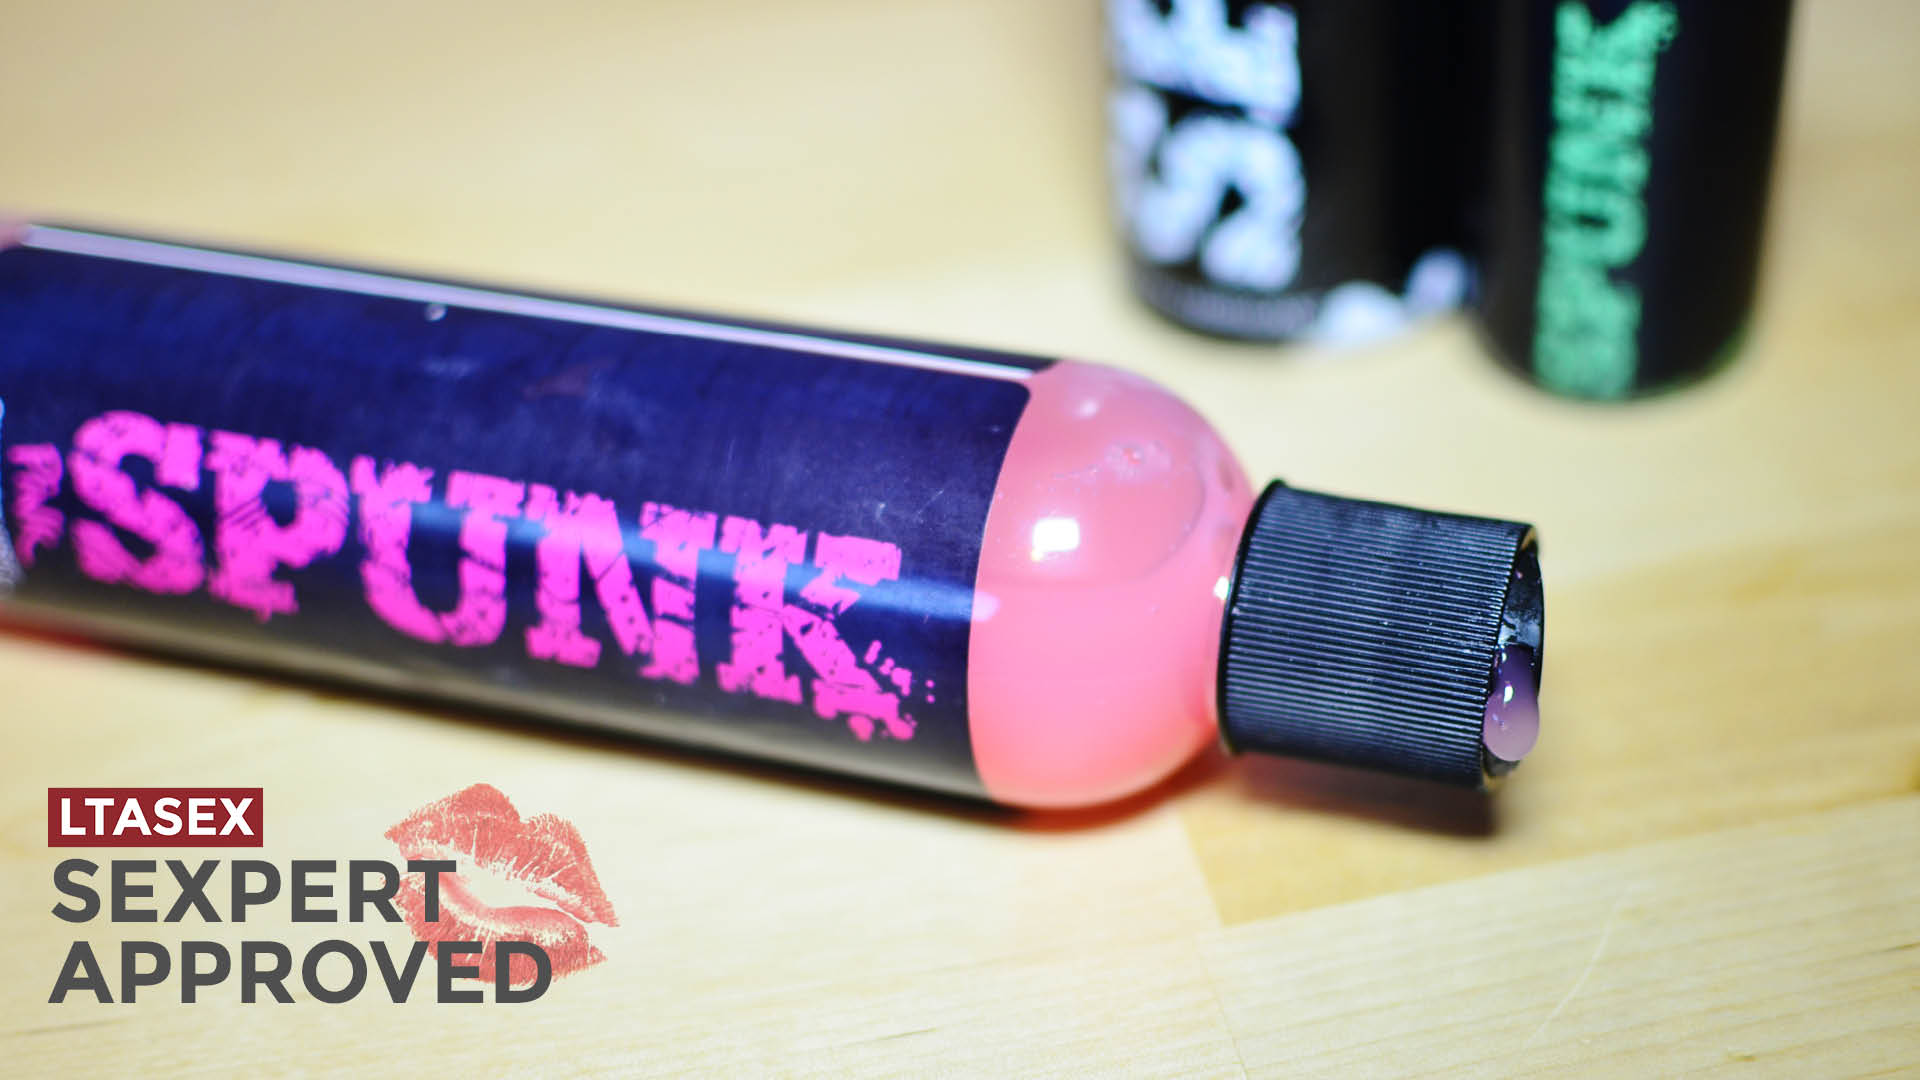 Spunk pink is one awesome lube - review.